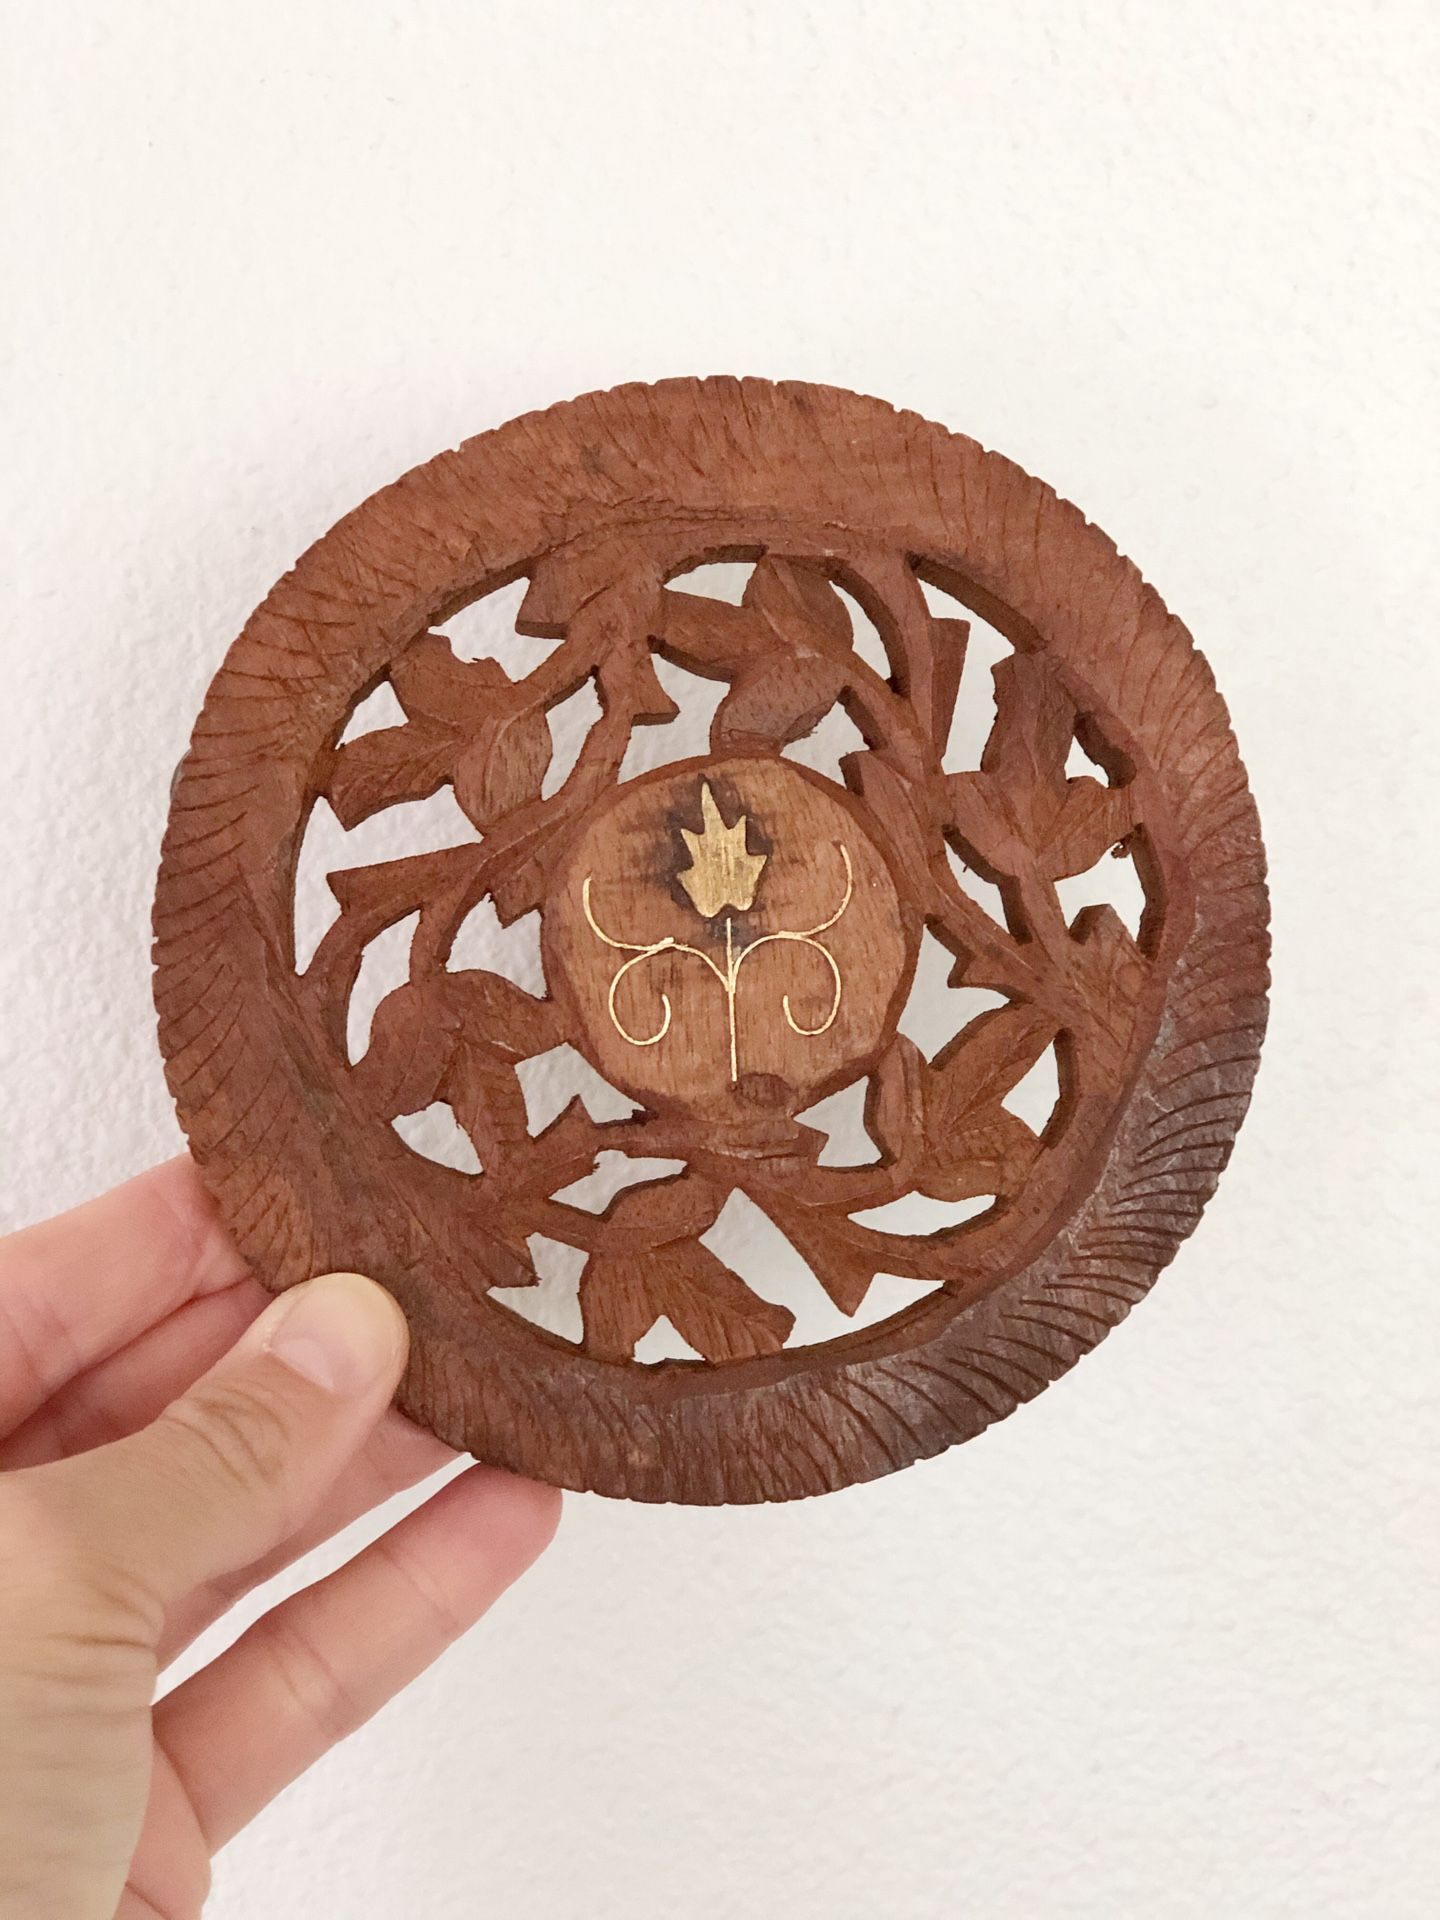 Carved wood trivet with brass inlay / made in India / 5” wide / $10